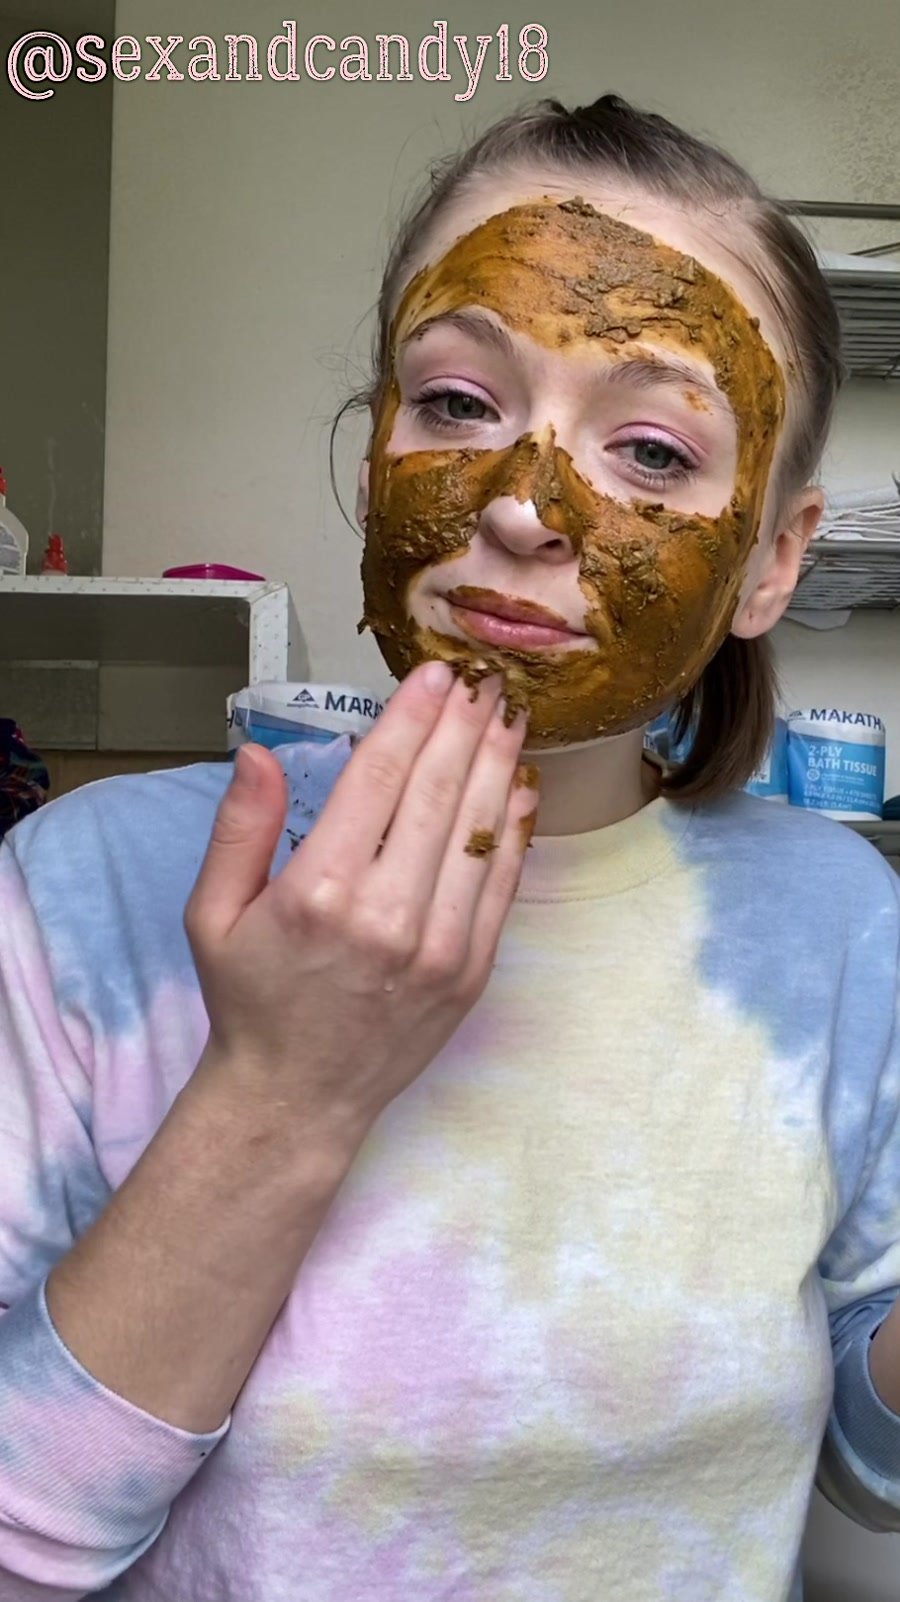 Scatting: (sexandcandy18) - Teen’s first diaper fill + face mask! [UltraHD 2K] - Amateur, Young